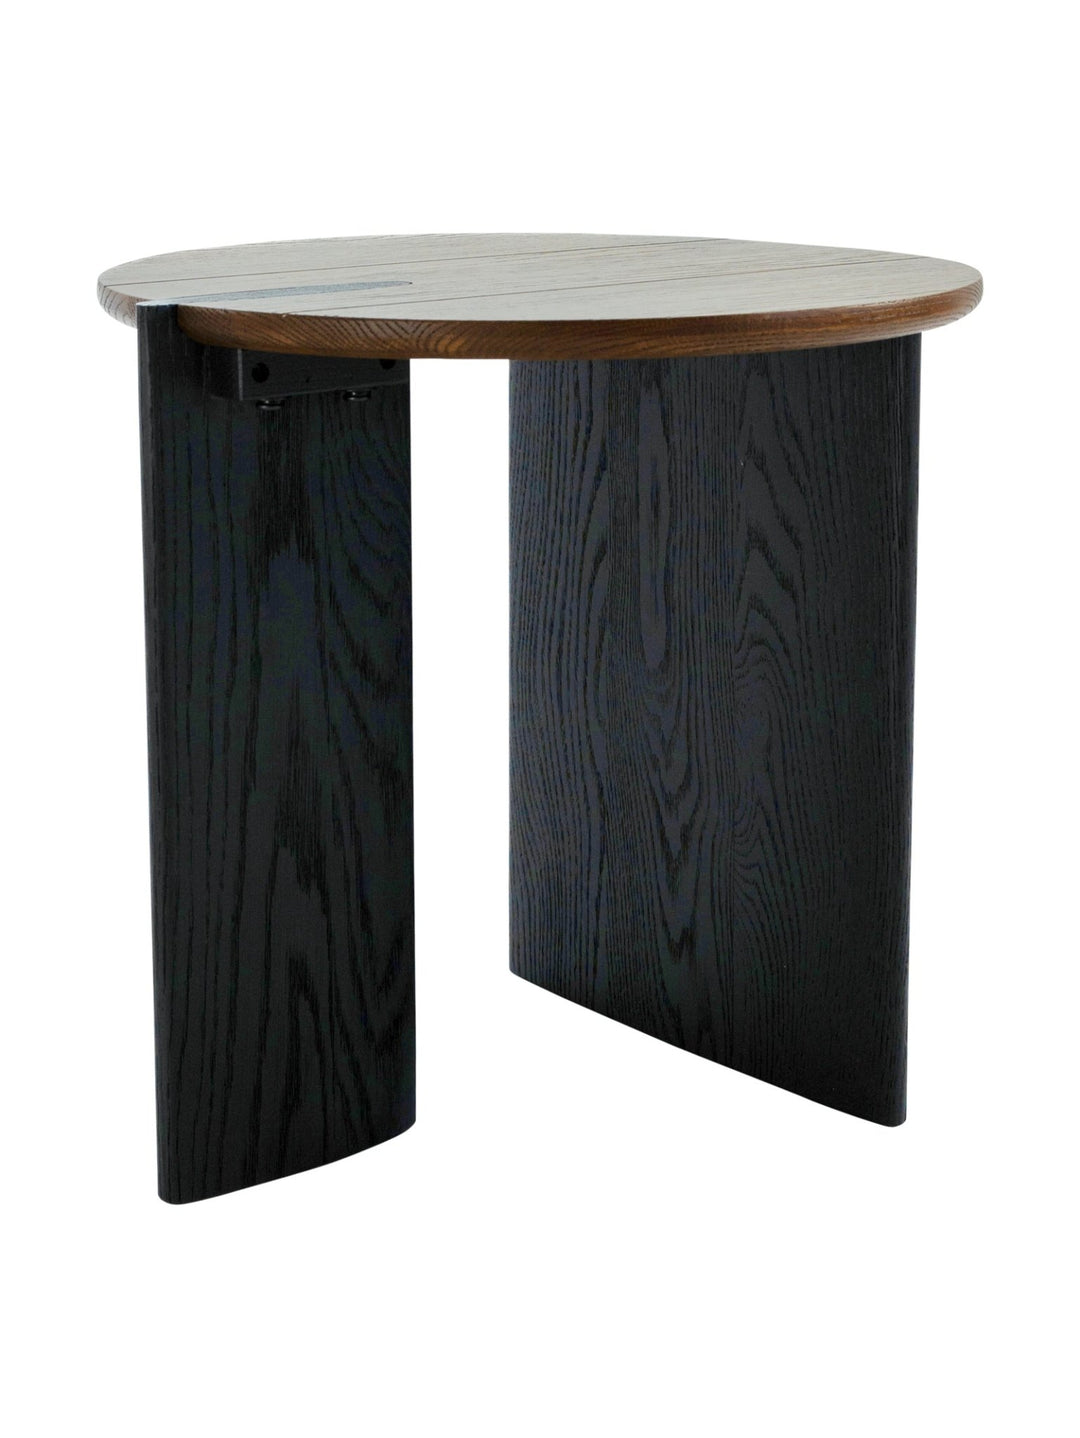 Directional Side Table in Earth - side table - Hertex Haus - Furniture